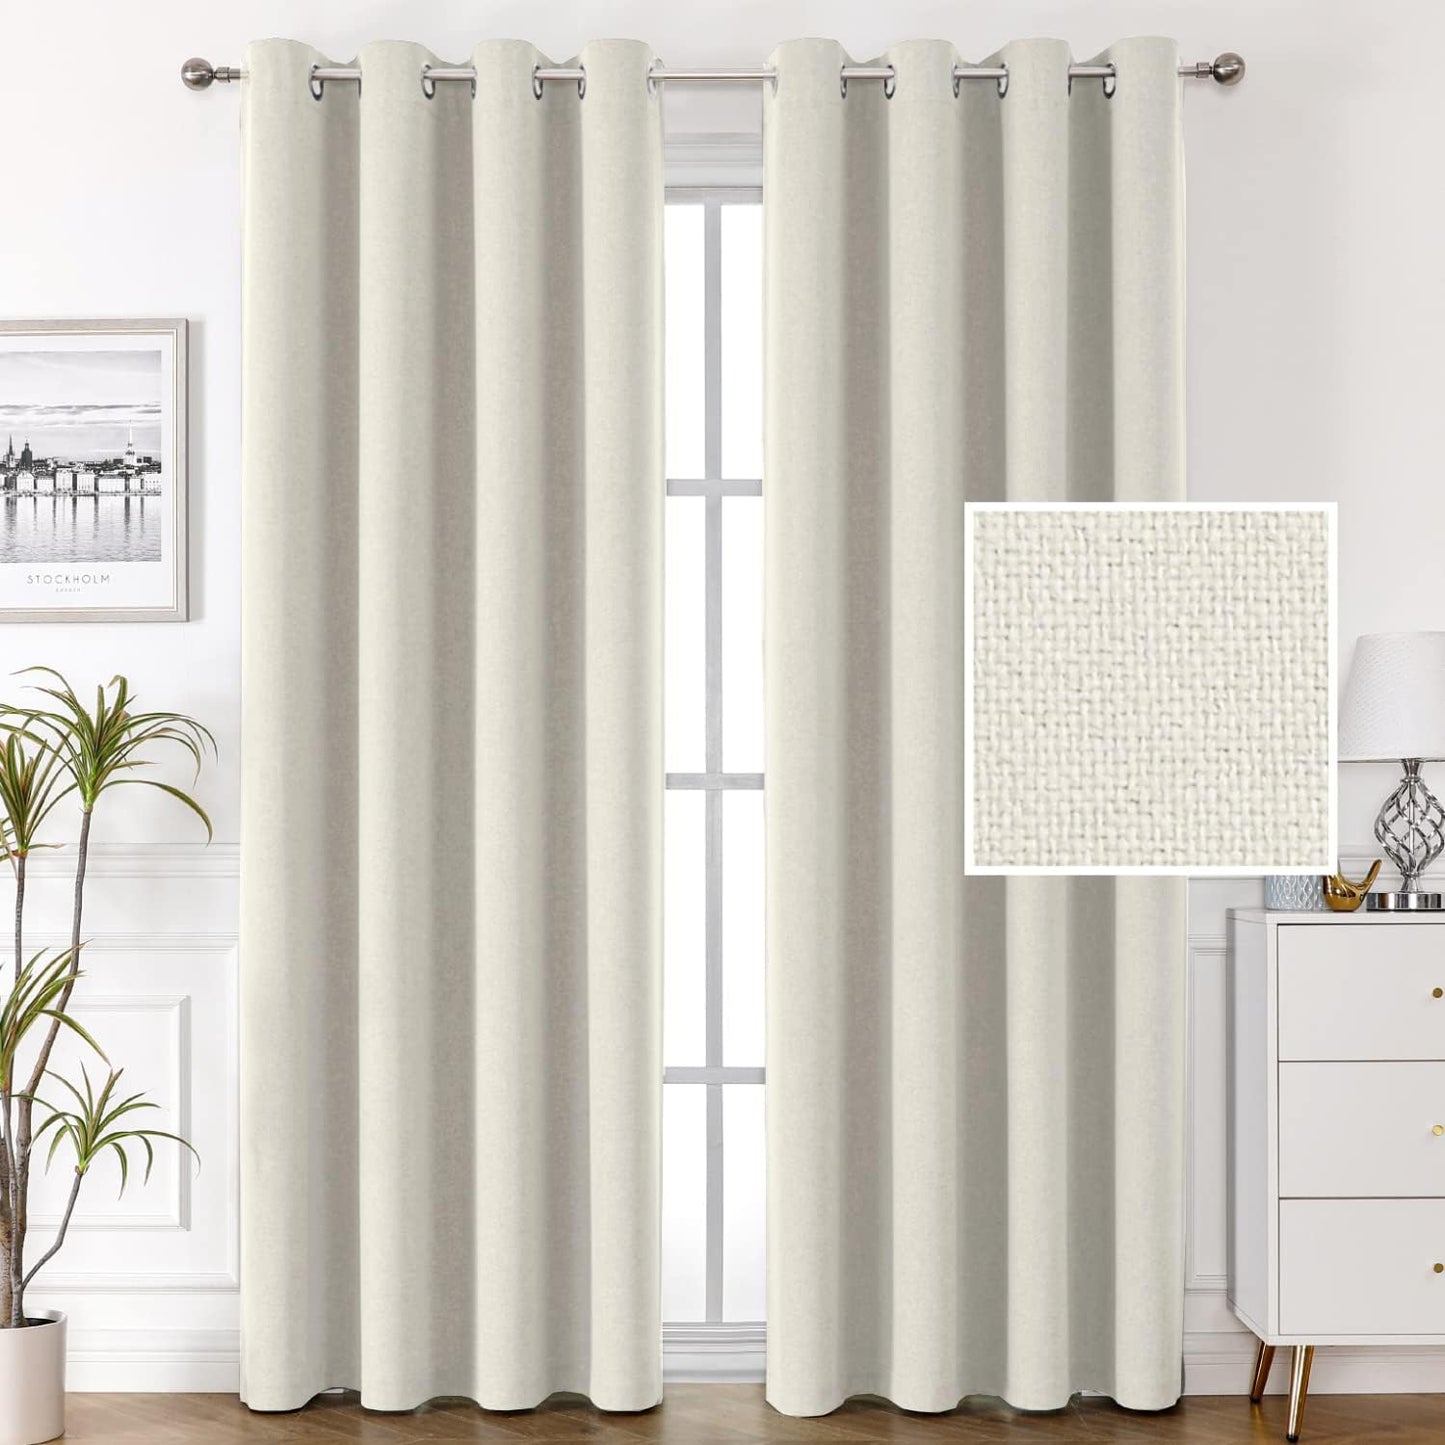 H.VERSAILTEX 100% Blackout Linen Look Curtains Thermal Insulated Curtains for Living Room Textured Burlap Drapes for Bedroom Grommet Linen Noise Blocking Curtains 42 X 84 Inch, 2 Panels - Off-White  H.VERSAILTEX Ivory 52"W X 108"L 